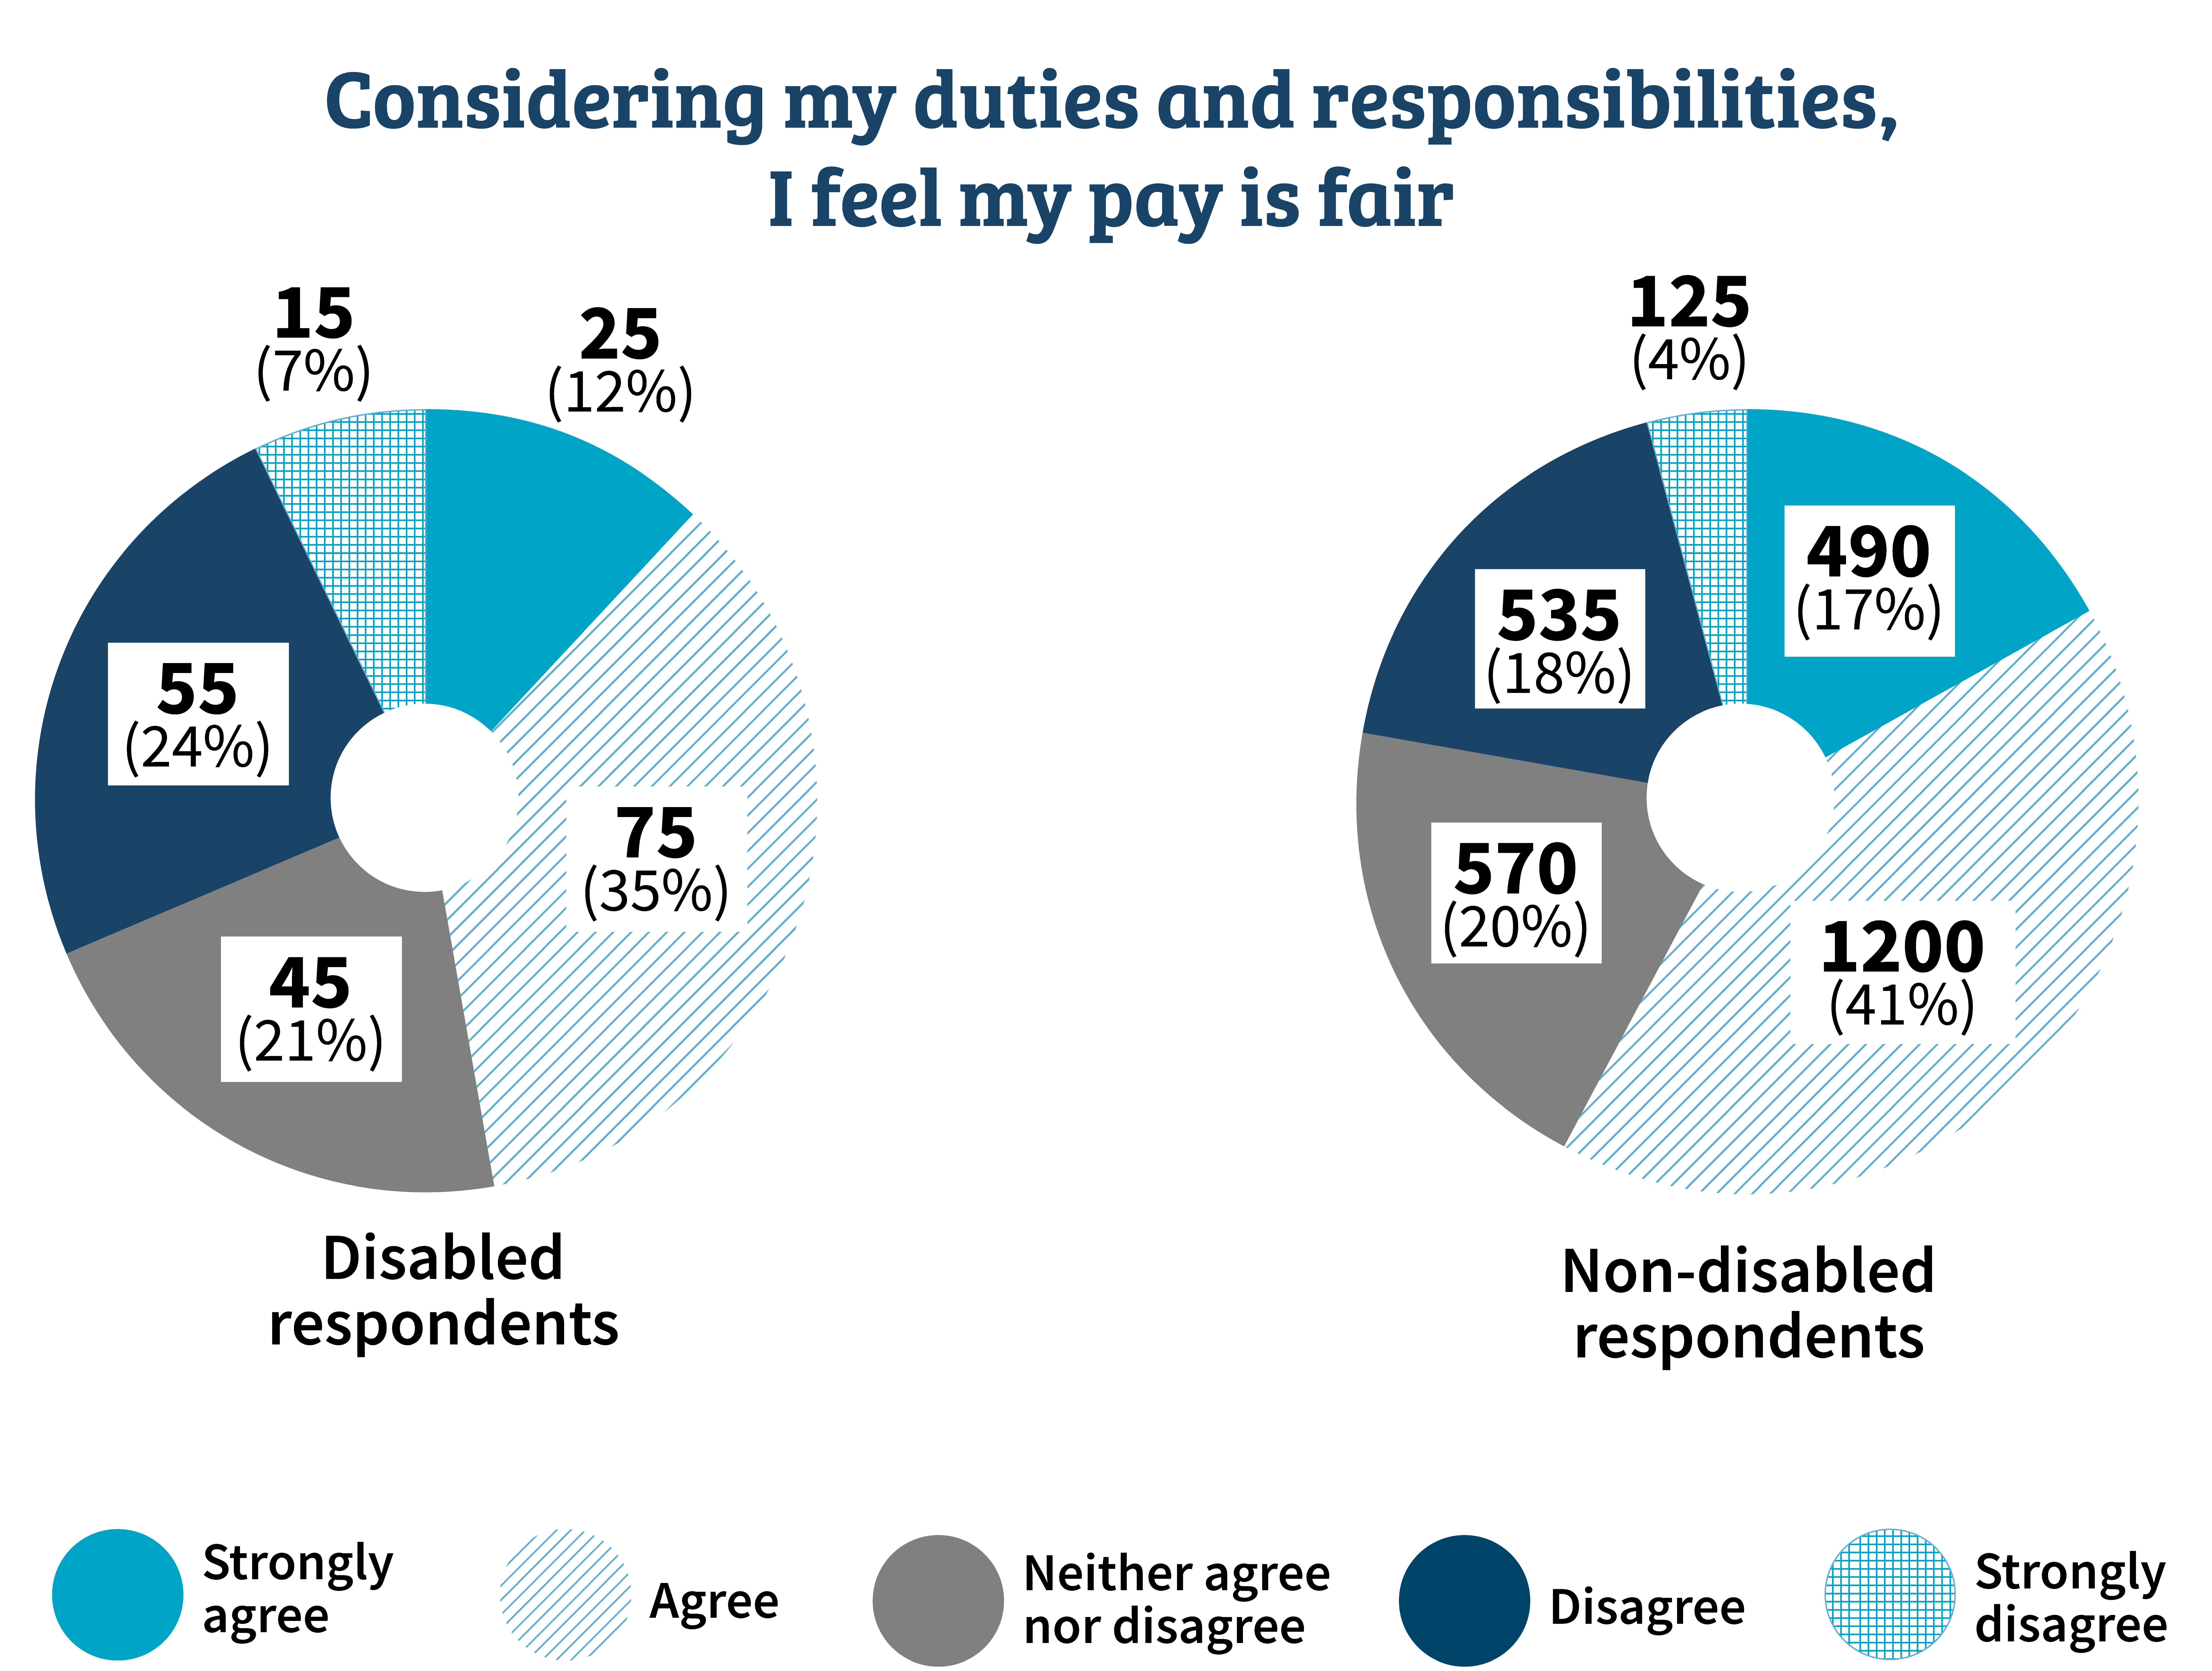 How our disabled and non-disabled members feel about their pay, see link for full accessible version